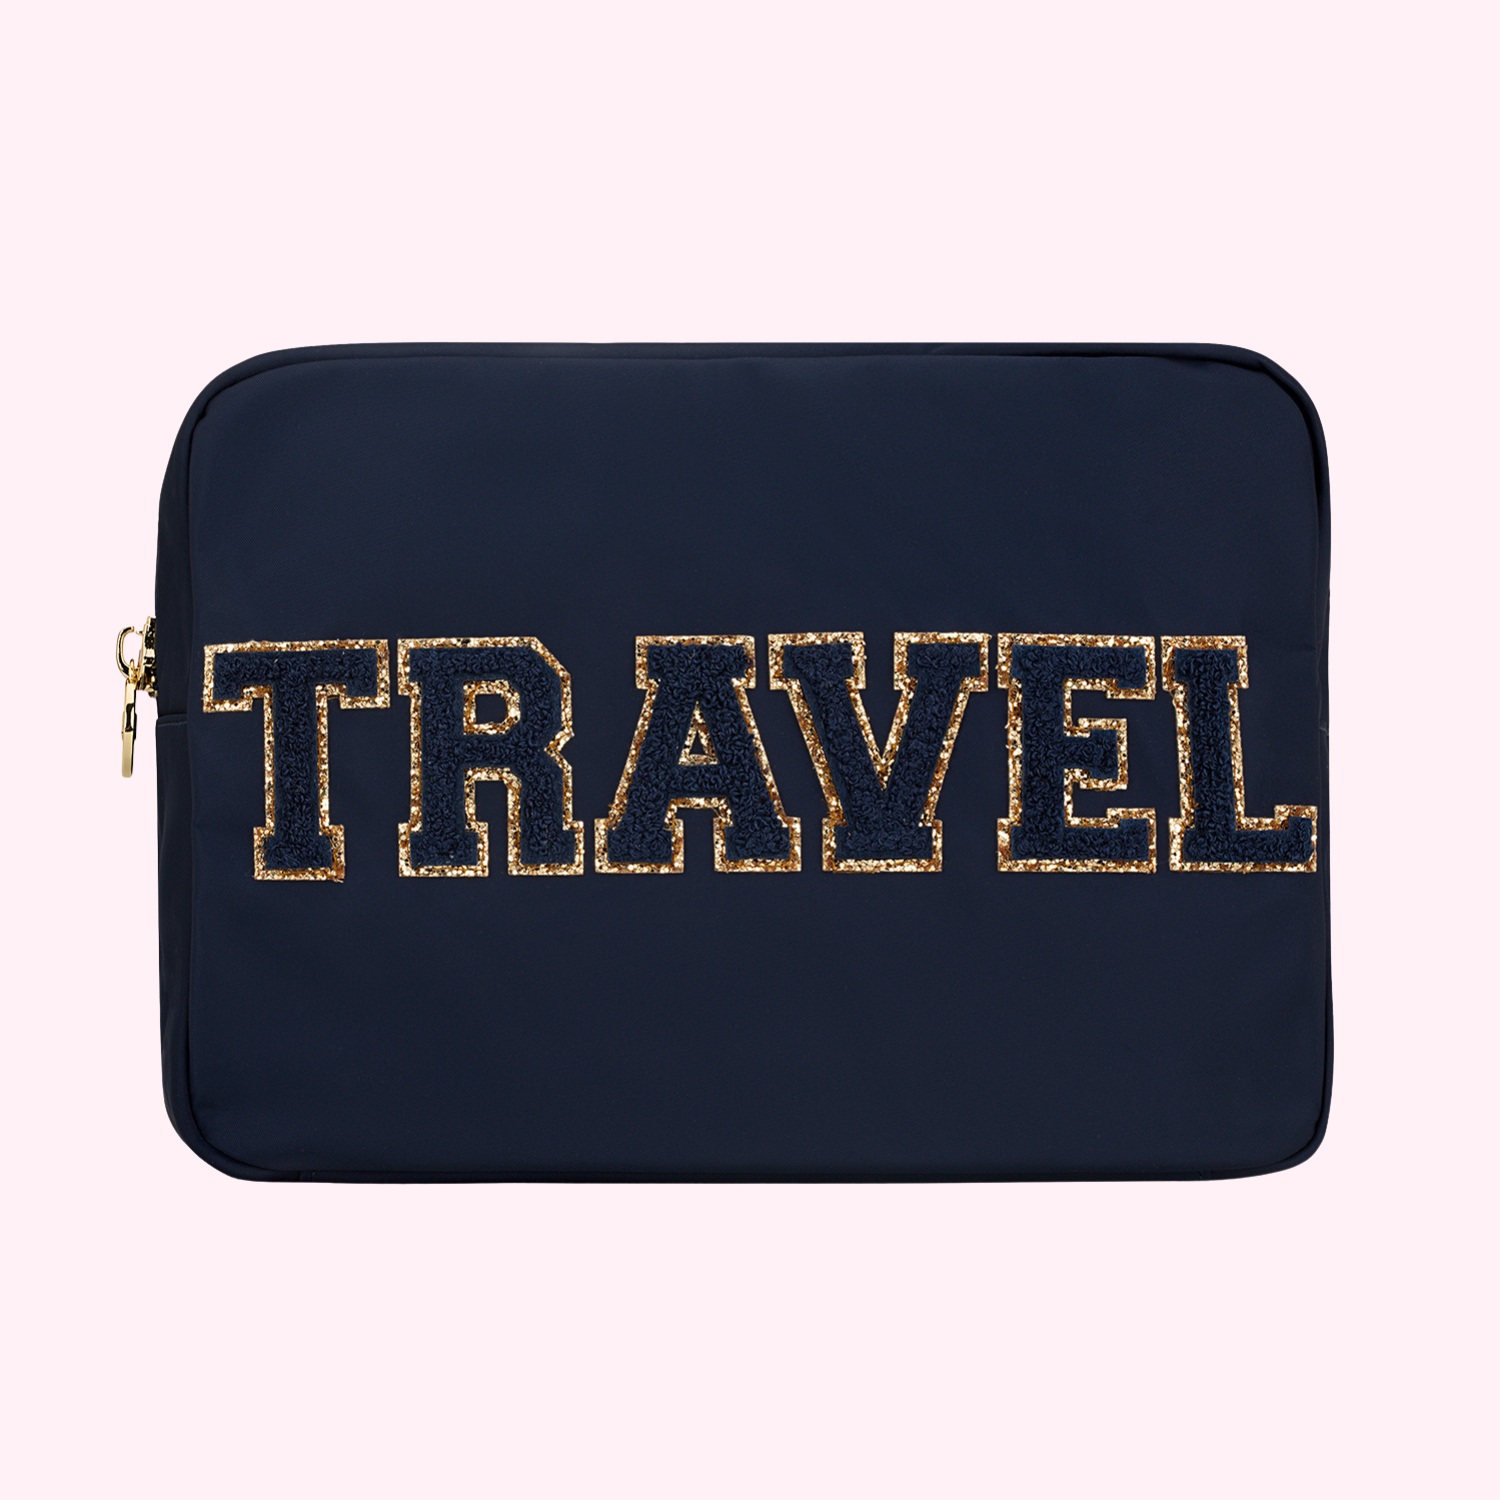 Travel Large Pouch